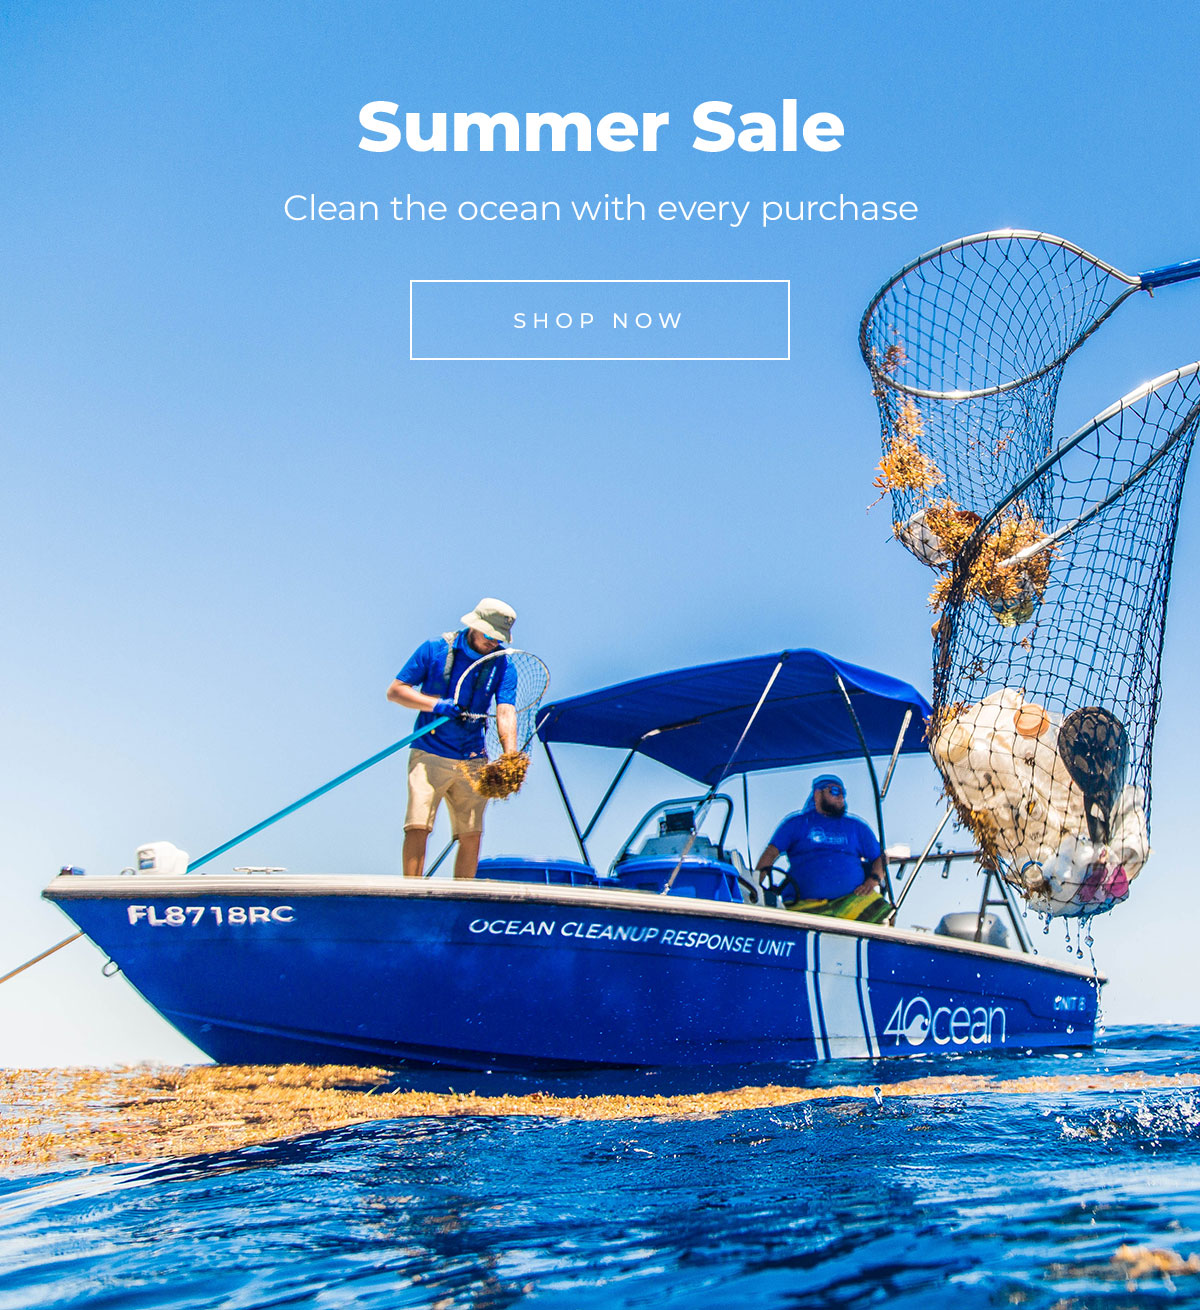 Summer Sale. Clean the ocean with every purchase. Shop Now